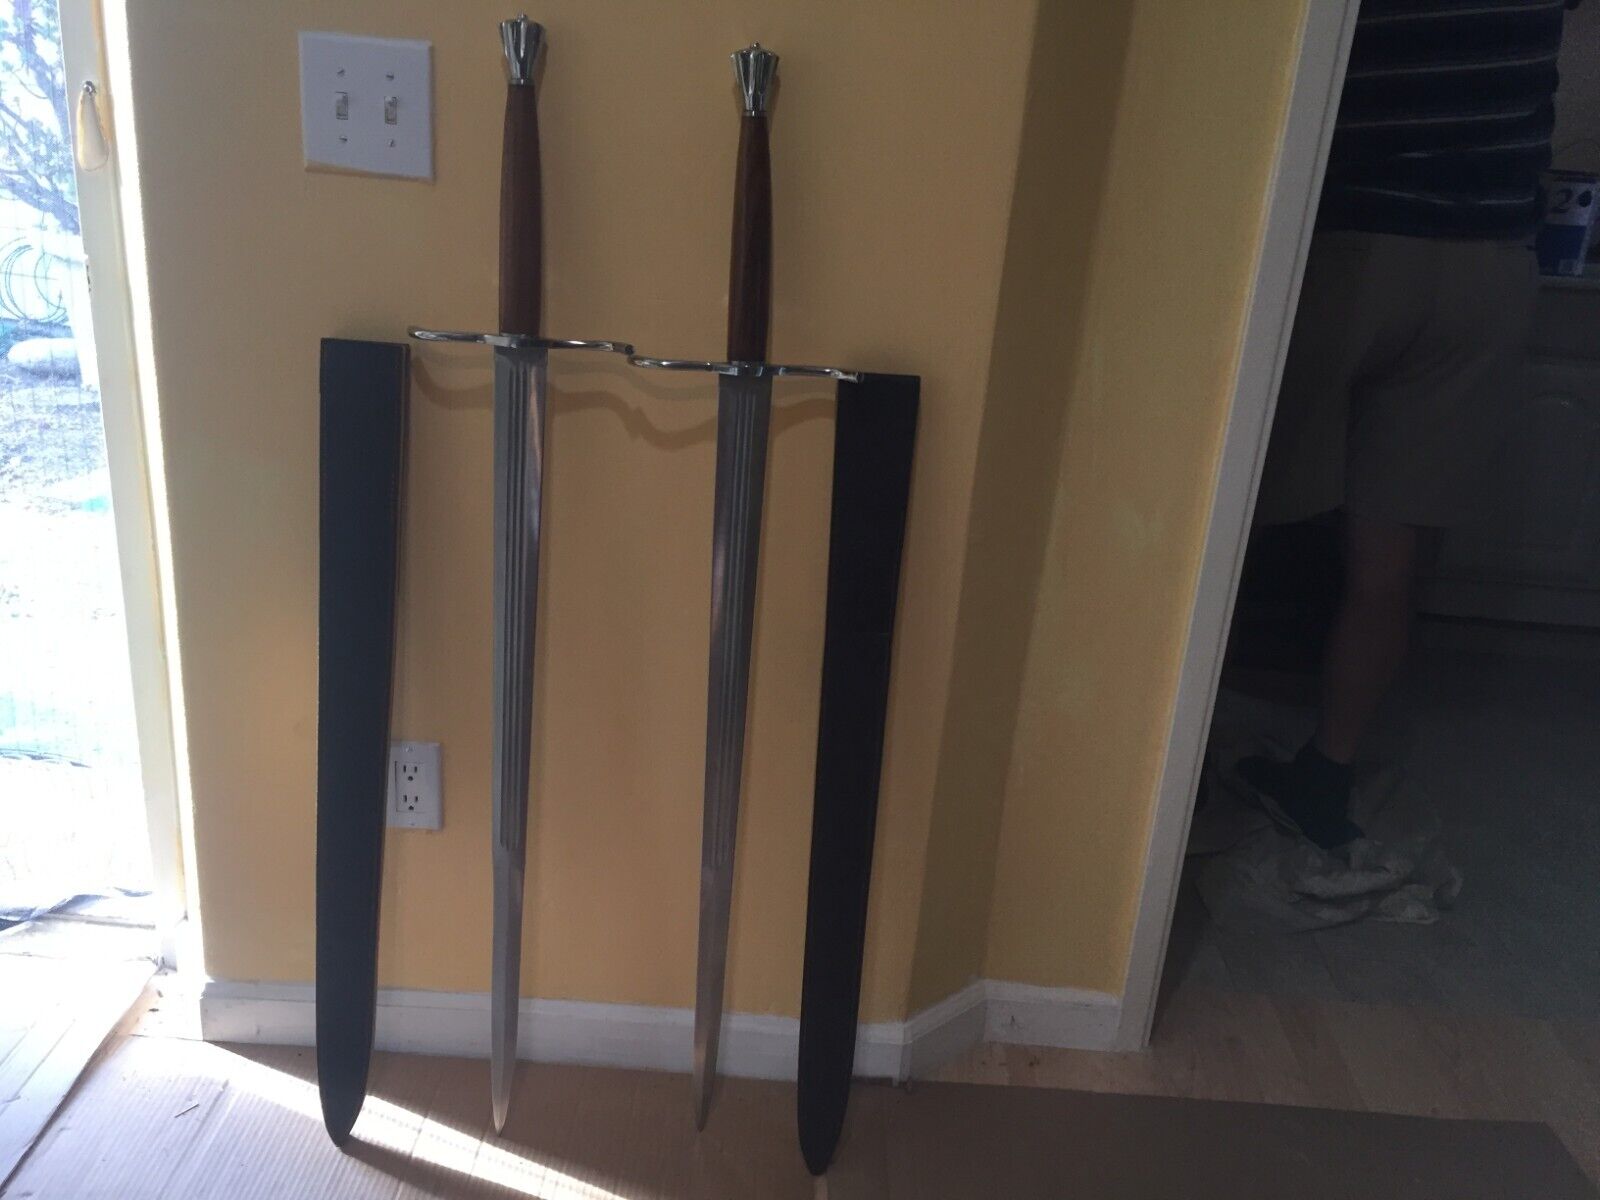 pair of super long swords 2 with leather sheaths